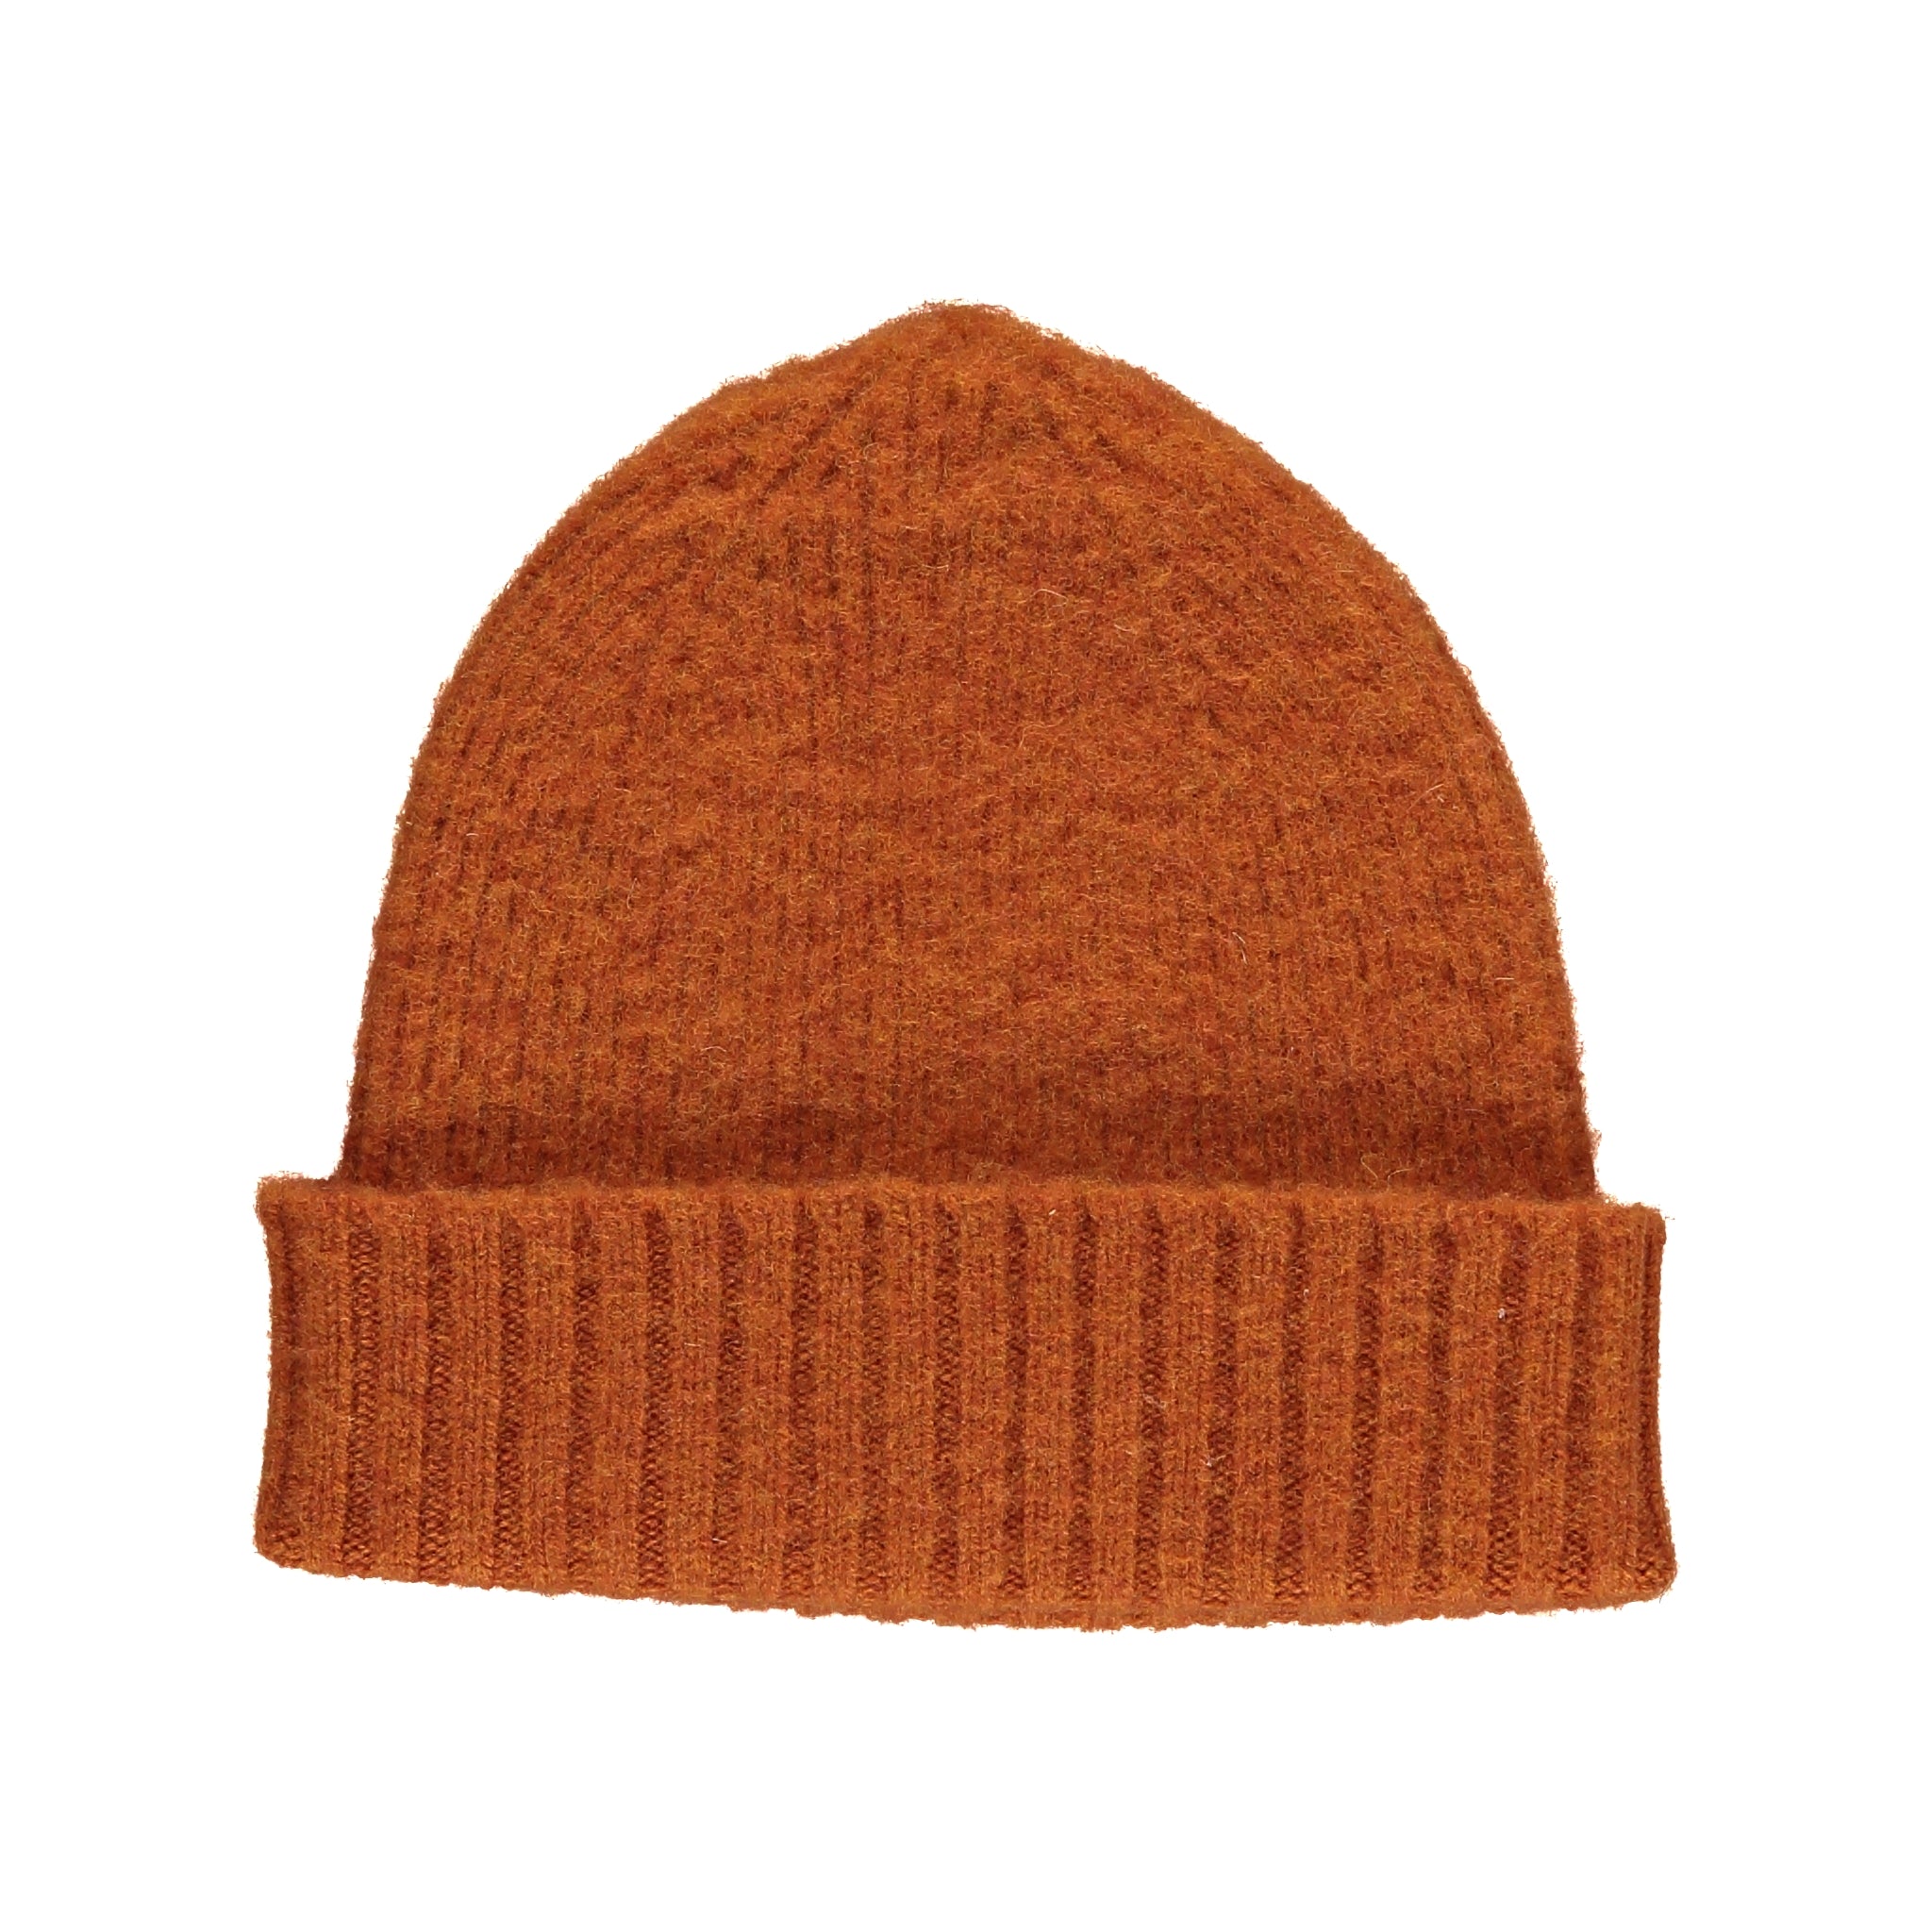 Quinton & Chadwick - Brushed Beanie